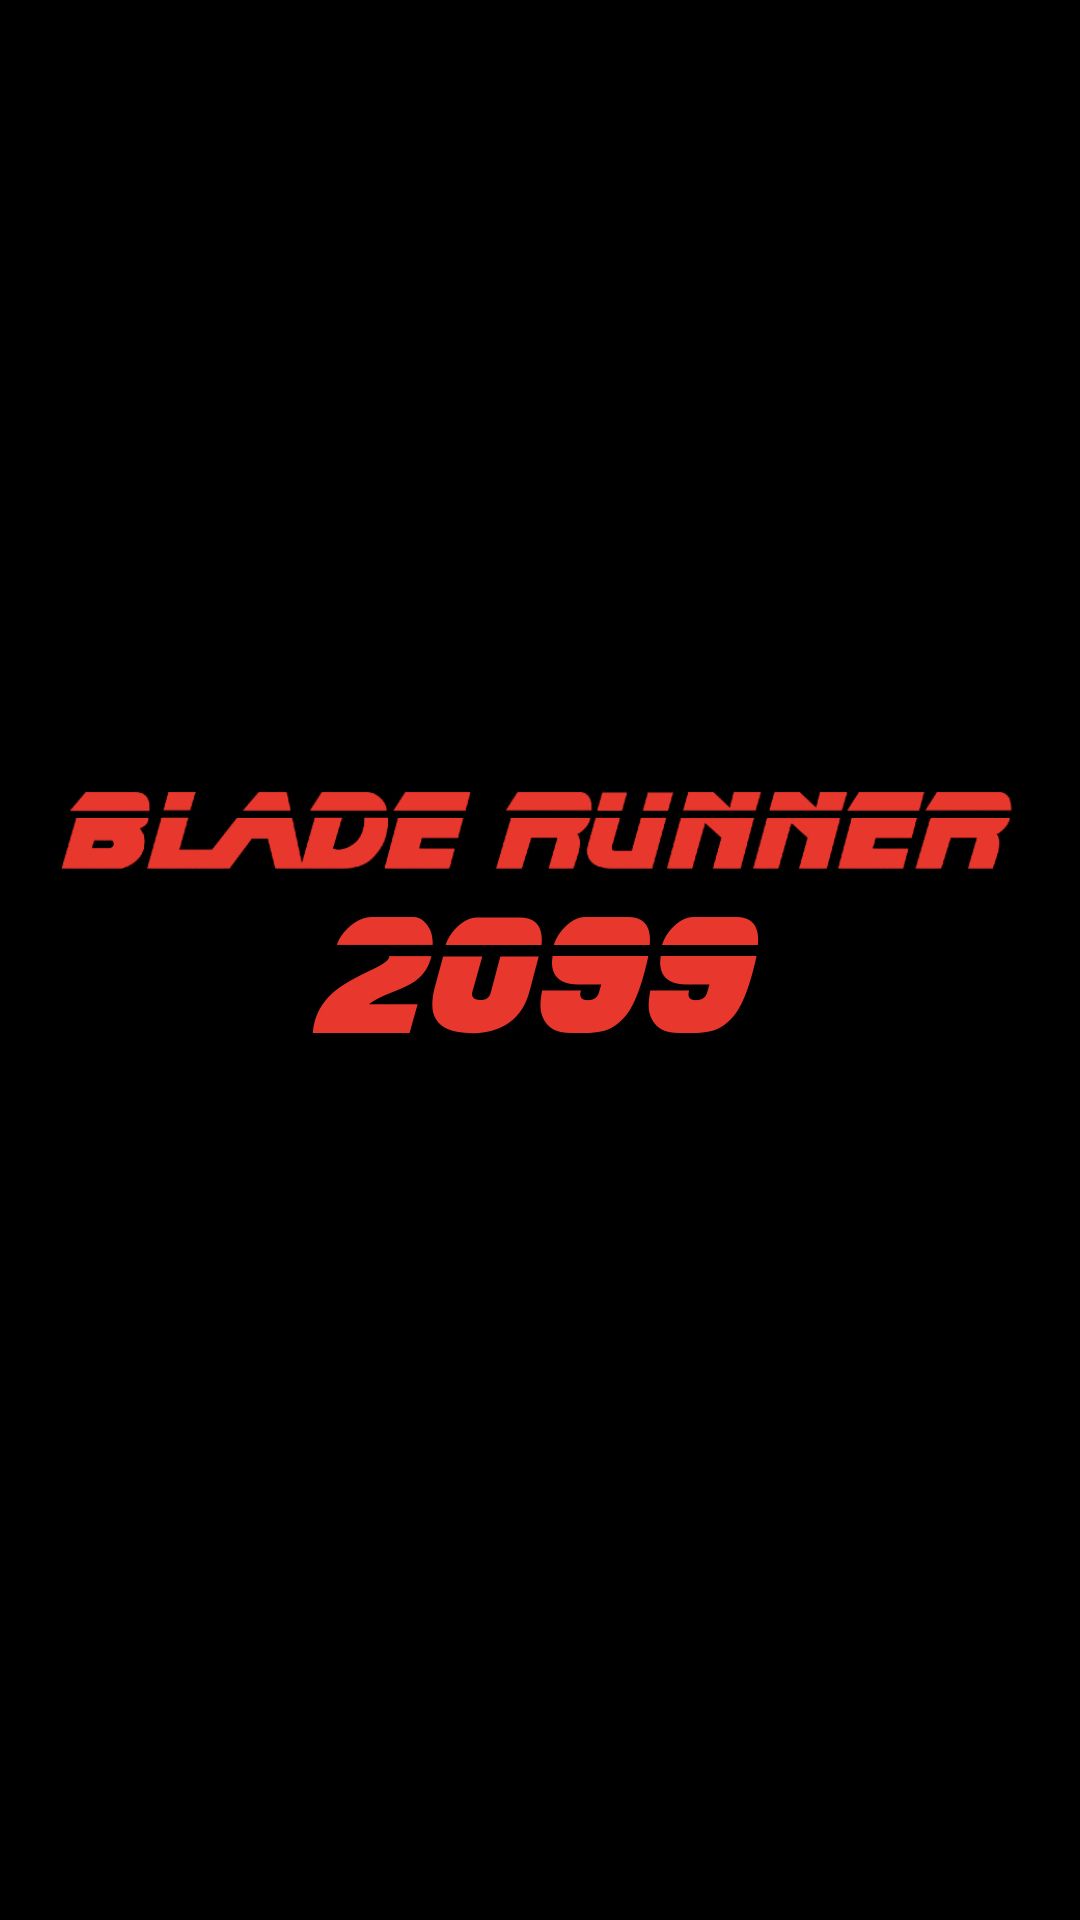 Blade Runner 2099 Gets Major Filming Update As Prime Video Sequel Finds Director Replacement